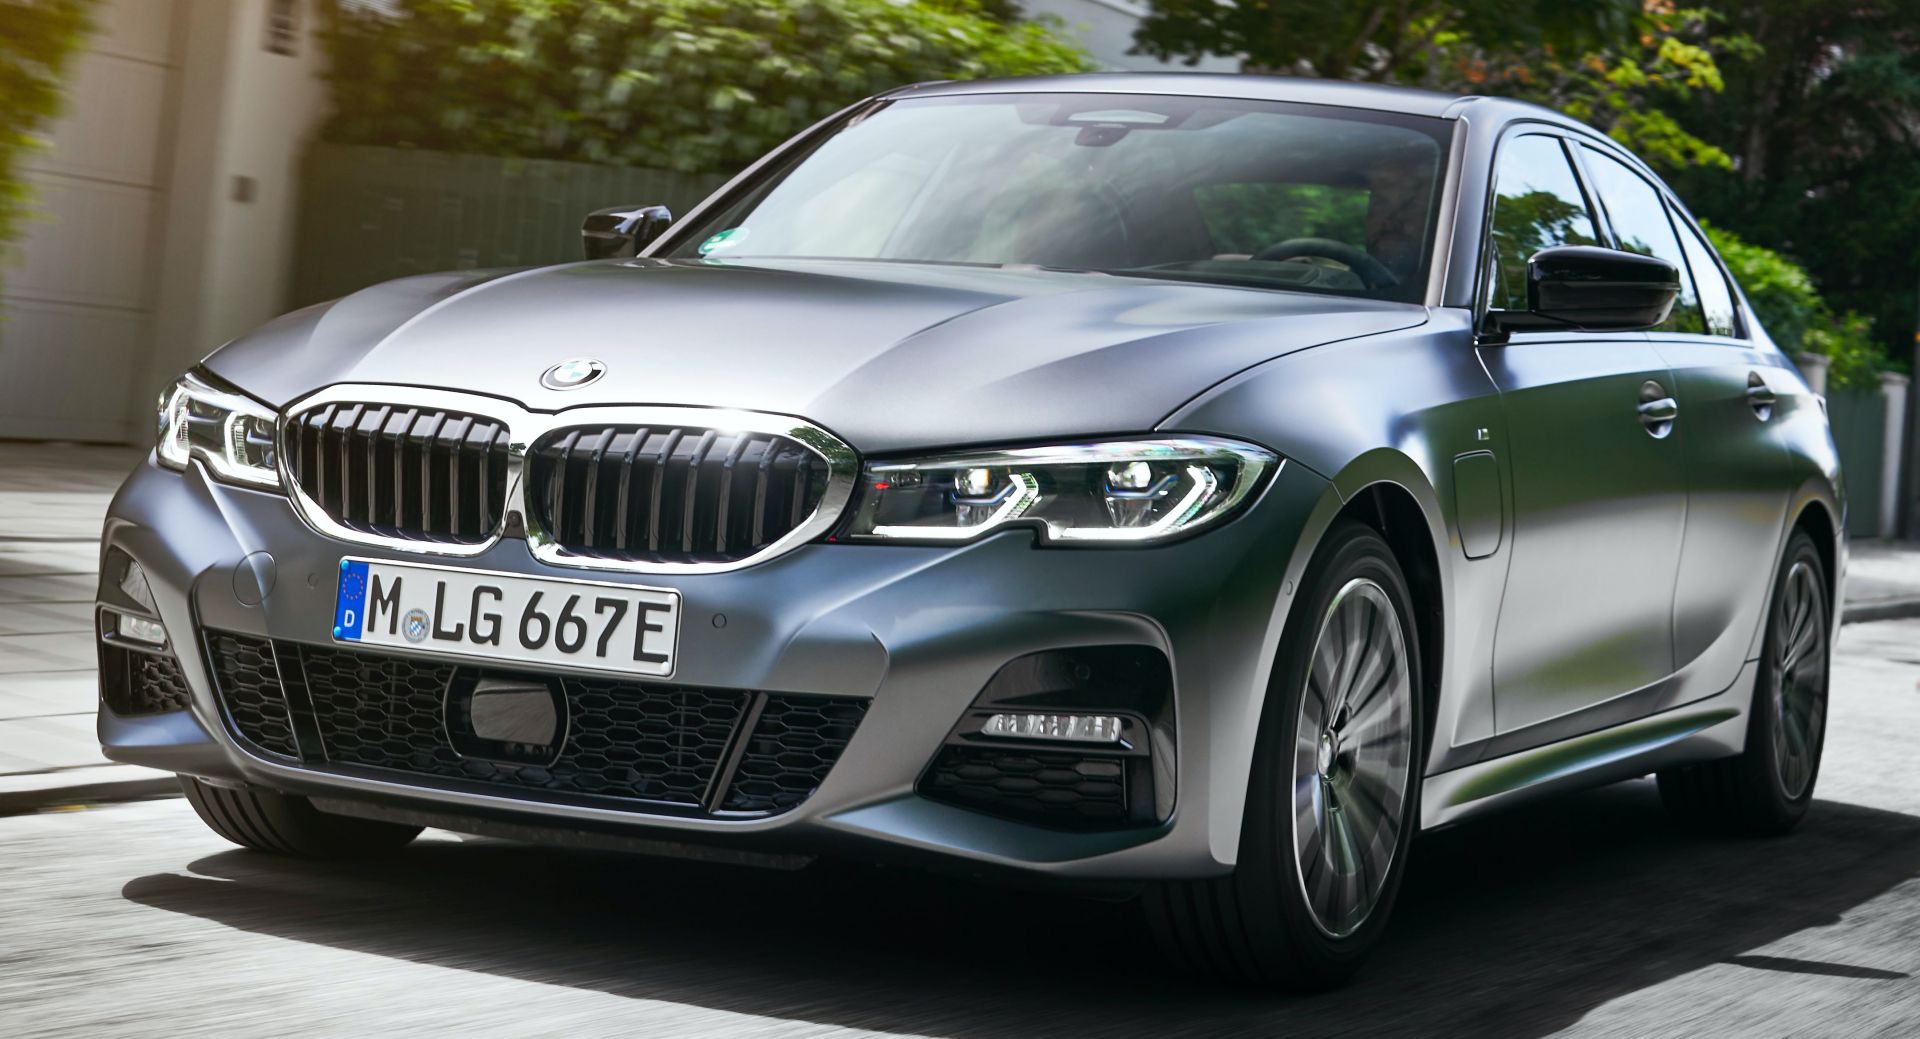 Is It Worth It? BMW 330e Plug-In Hybrid Cost You $3.8k More Than The | Carscoops